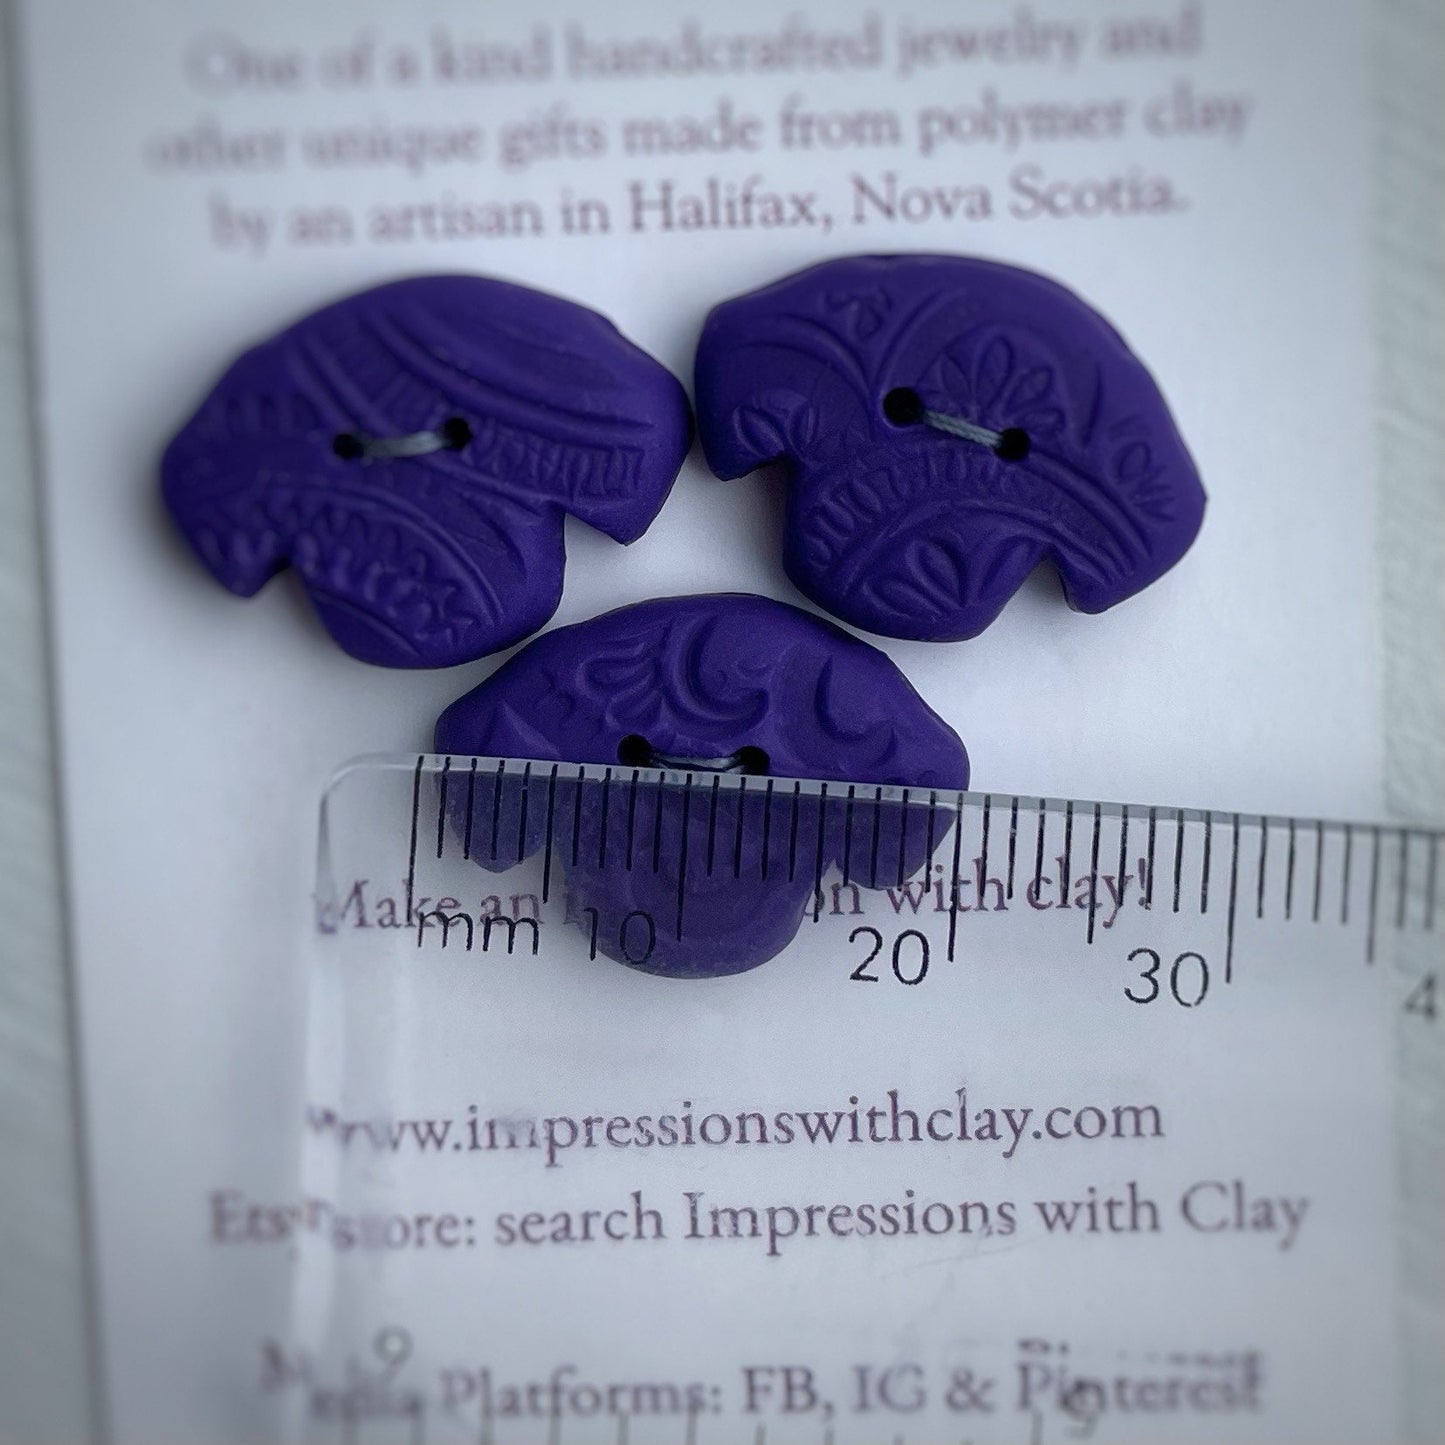 Purple Quality Dog Buttons | with Impression | Double layer Polymer Clay Buttons - set of 3 - 20mm x 14mm